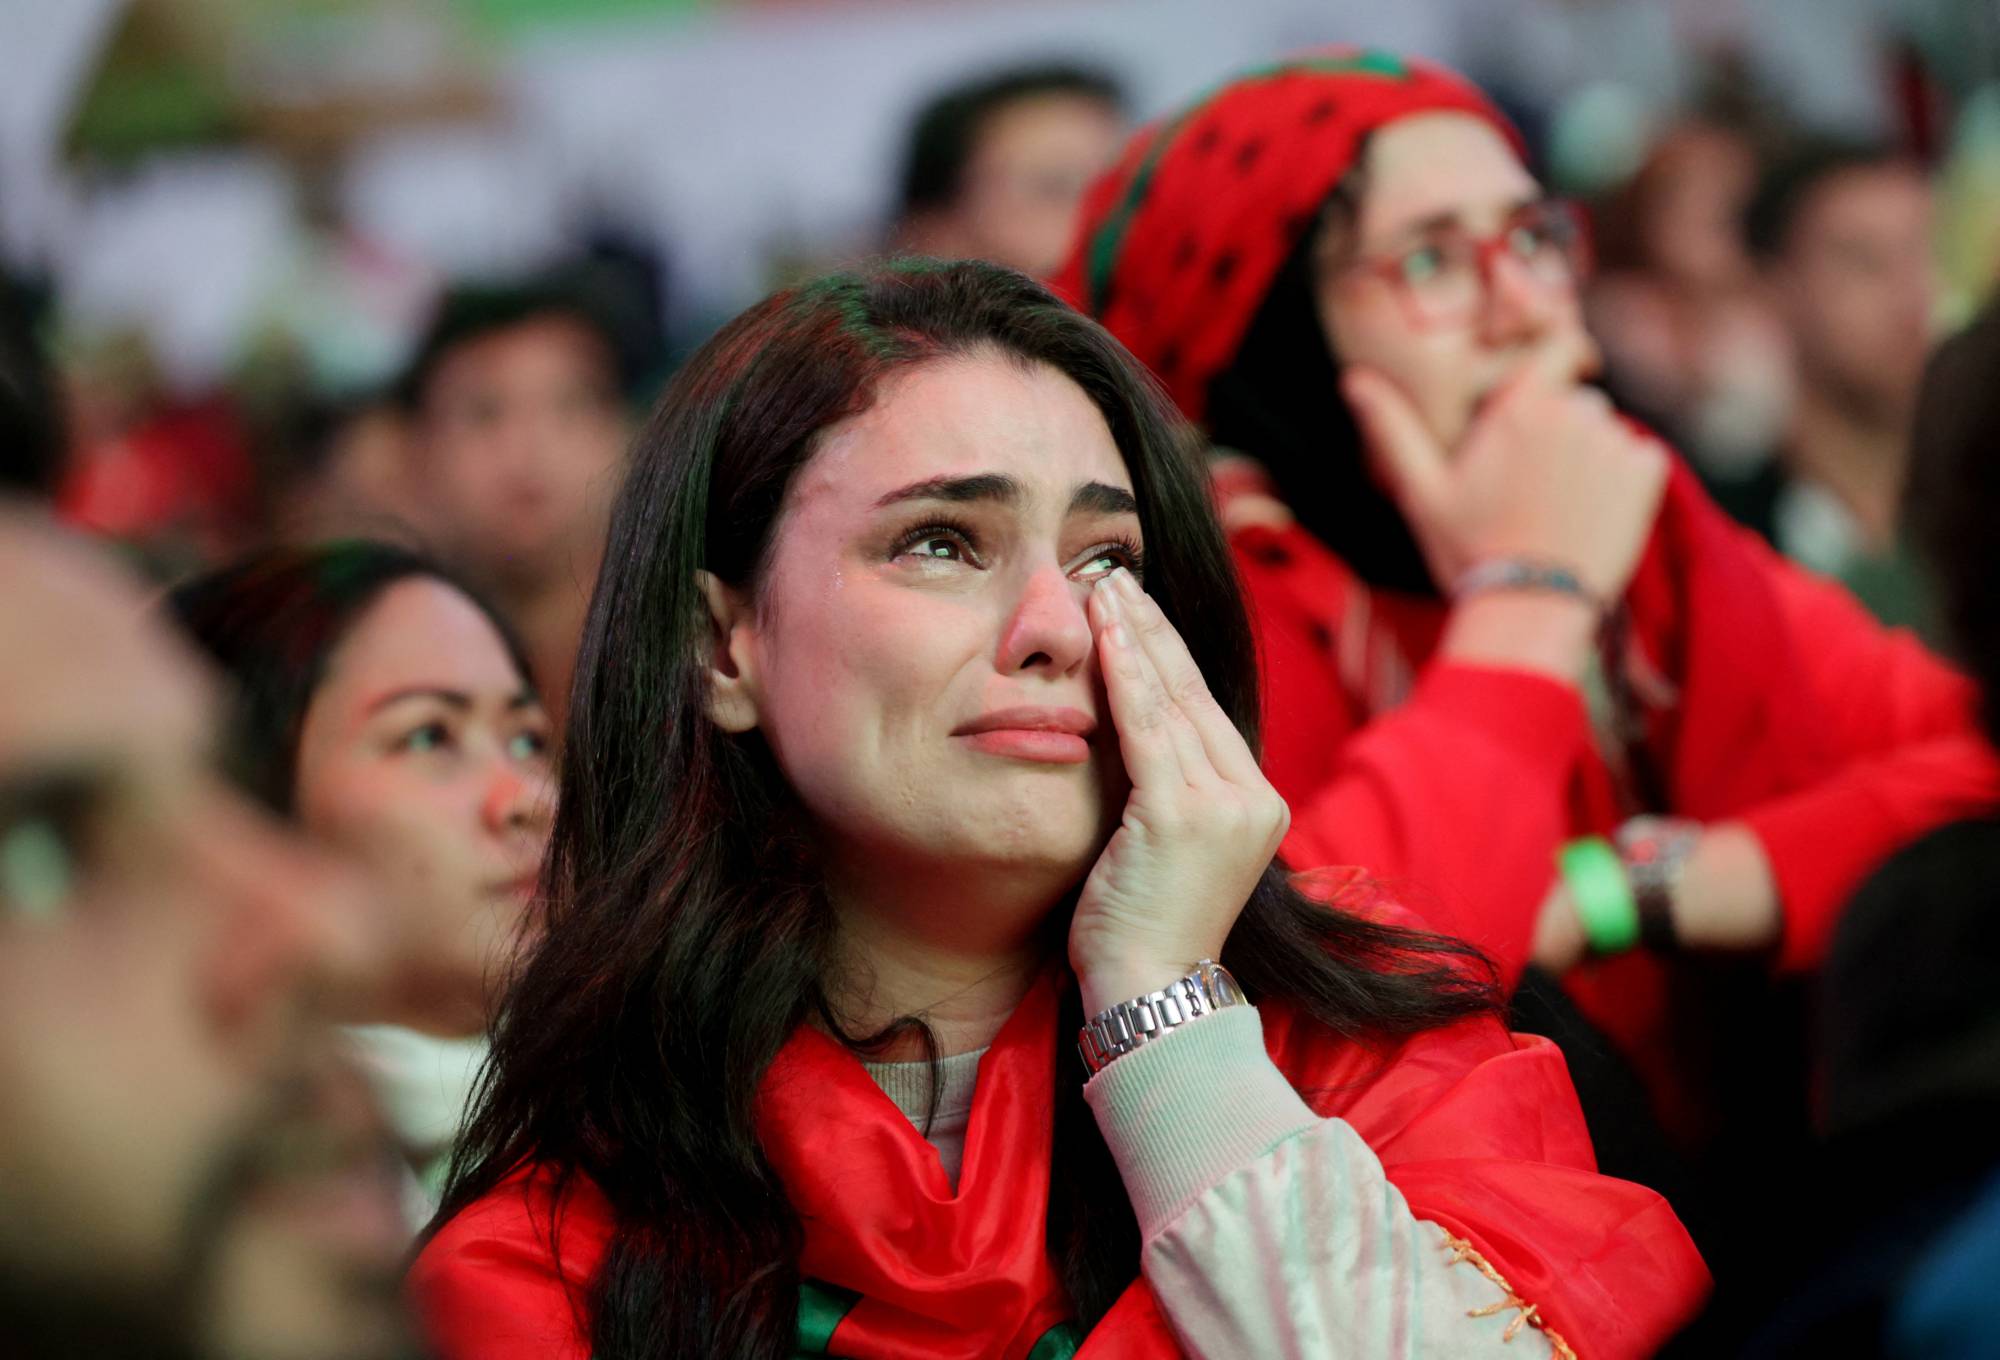 Proud Moroccans praise team after thrilling World Cup run ends in semifinals